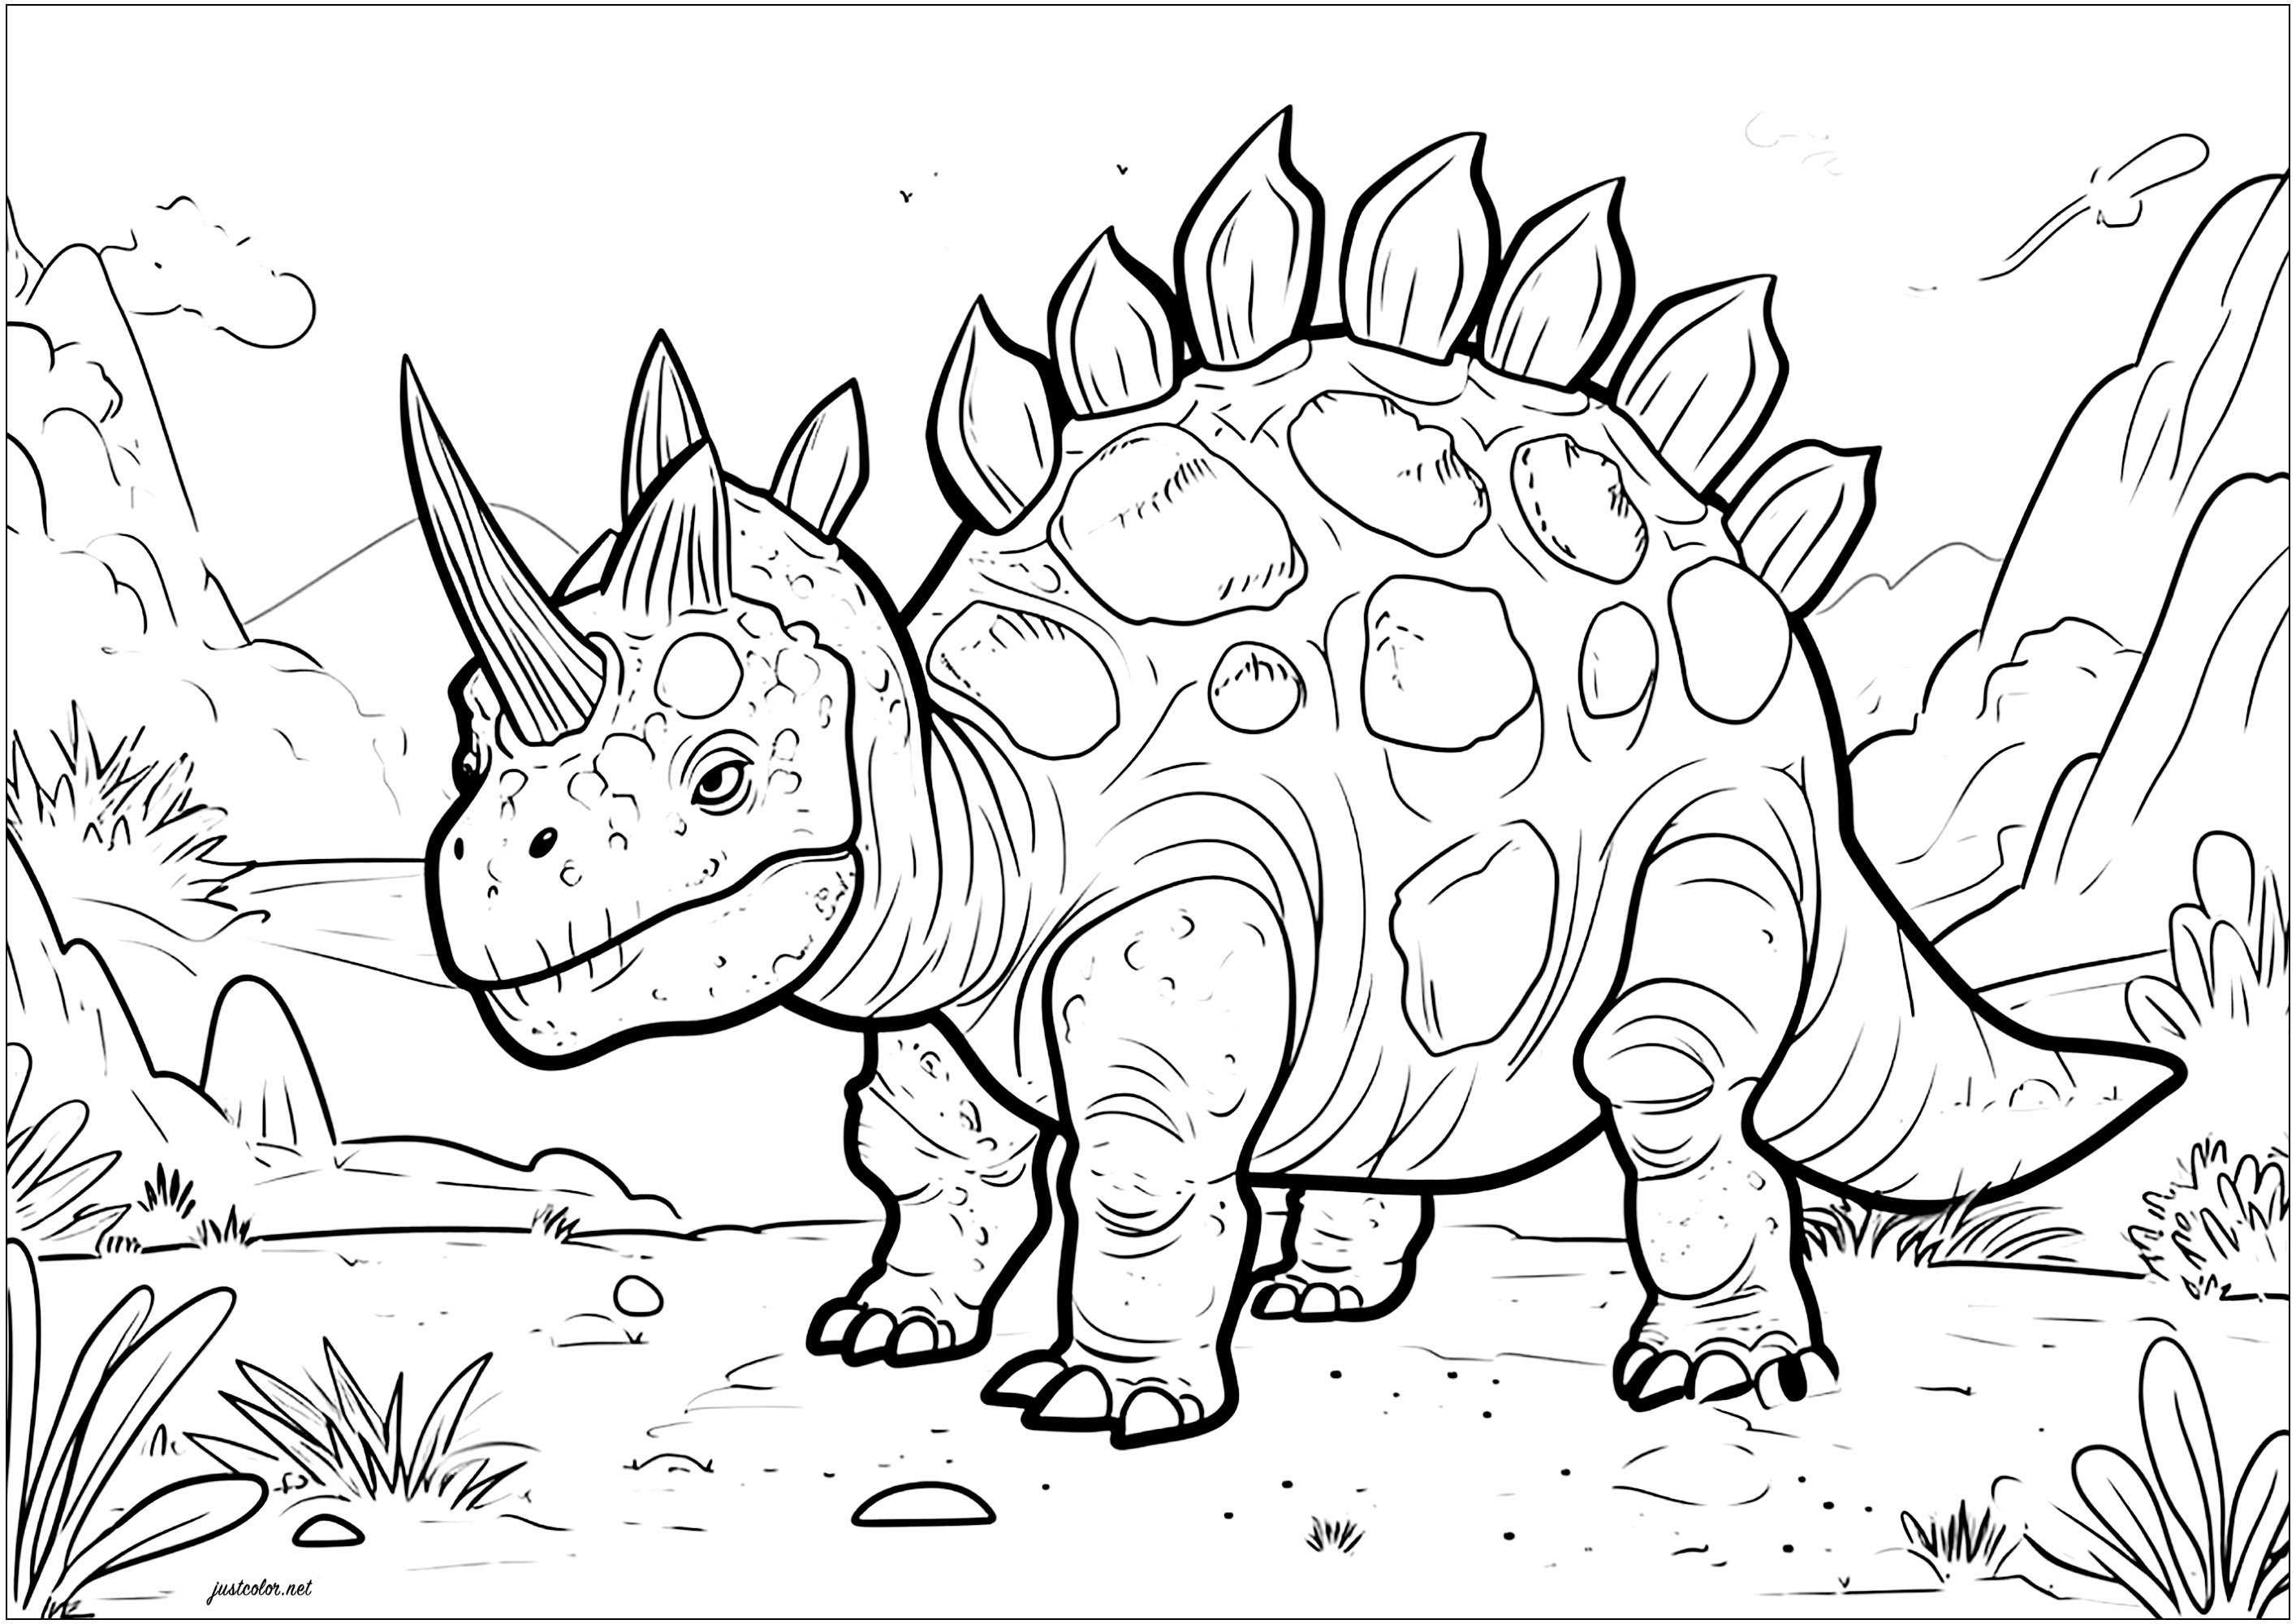 Coloring page : Dinosaurs - 8